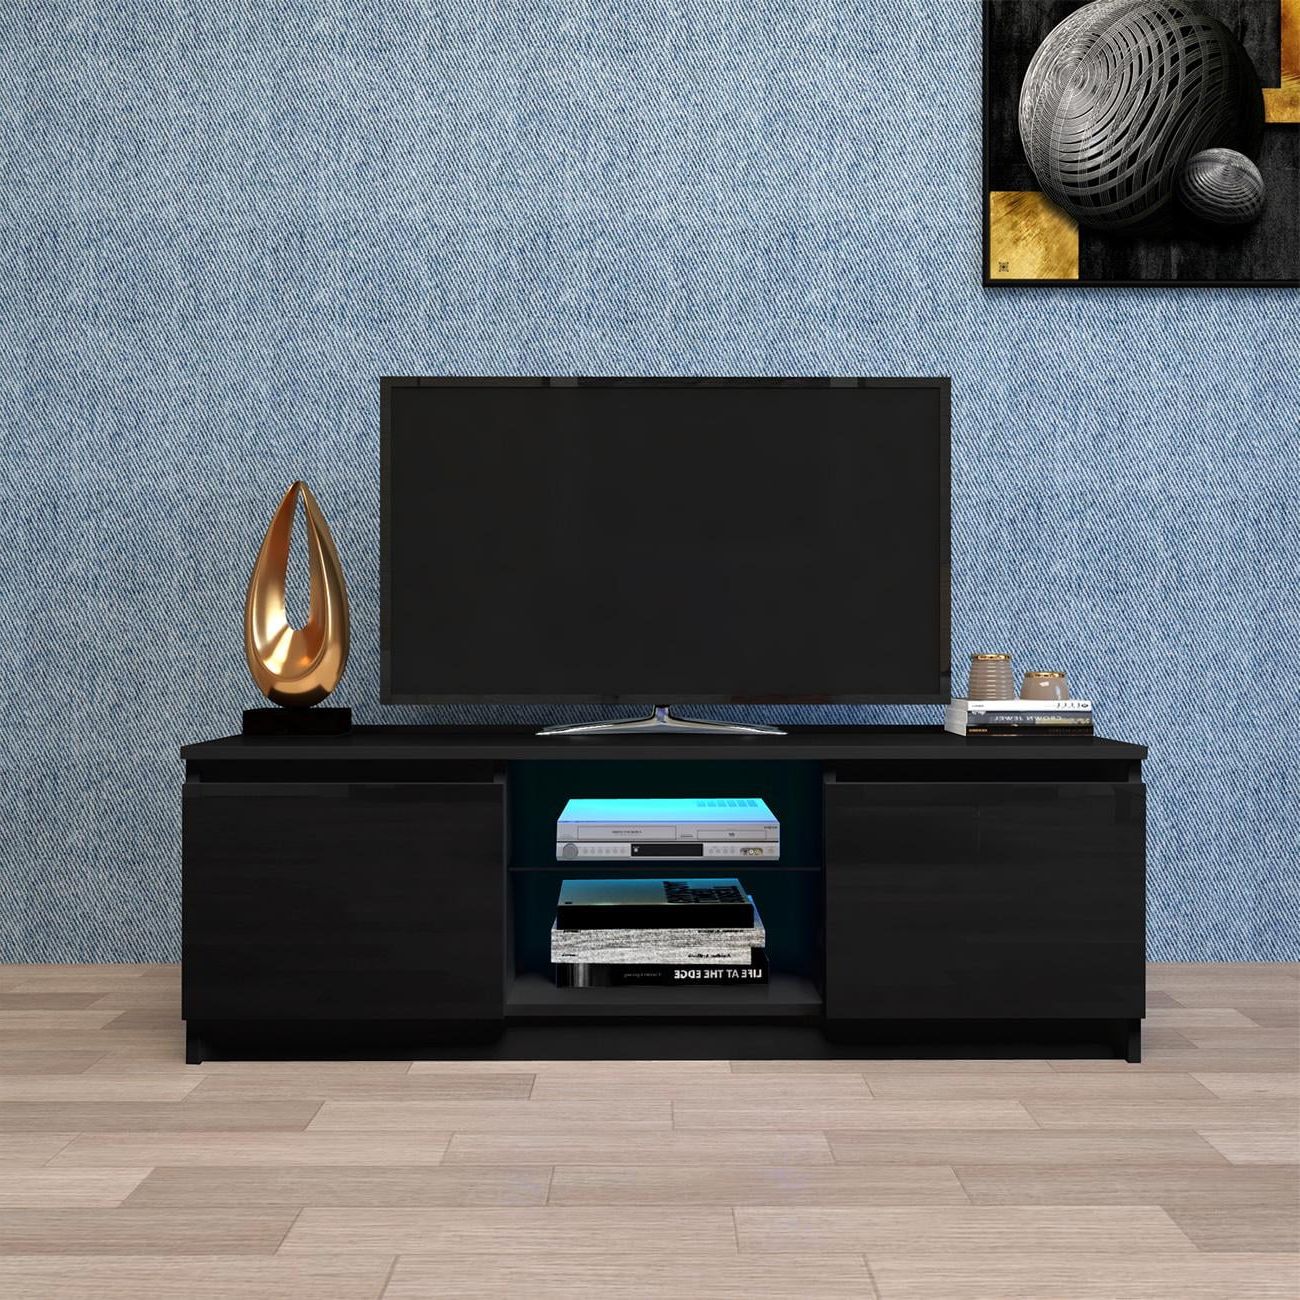 Tv Stand With Storage Drawers Shelves Led Rgb Lights, For Flat Tv 40 55 With Best And Newest Rgb Tv Entertainment Centers (View 4 of 15)